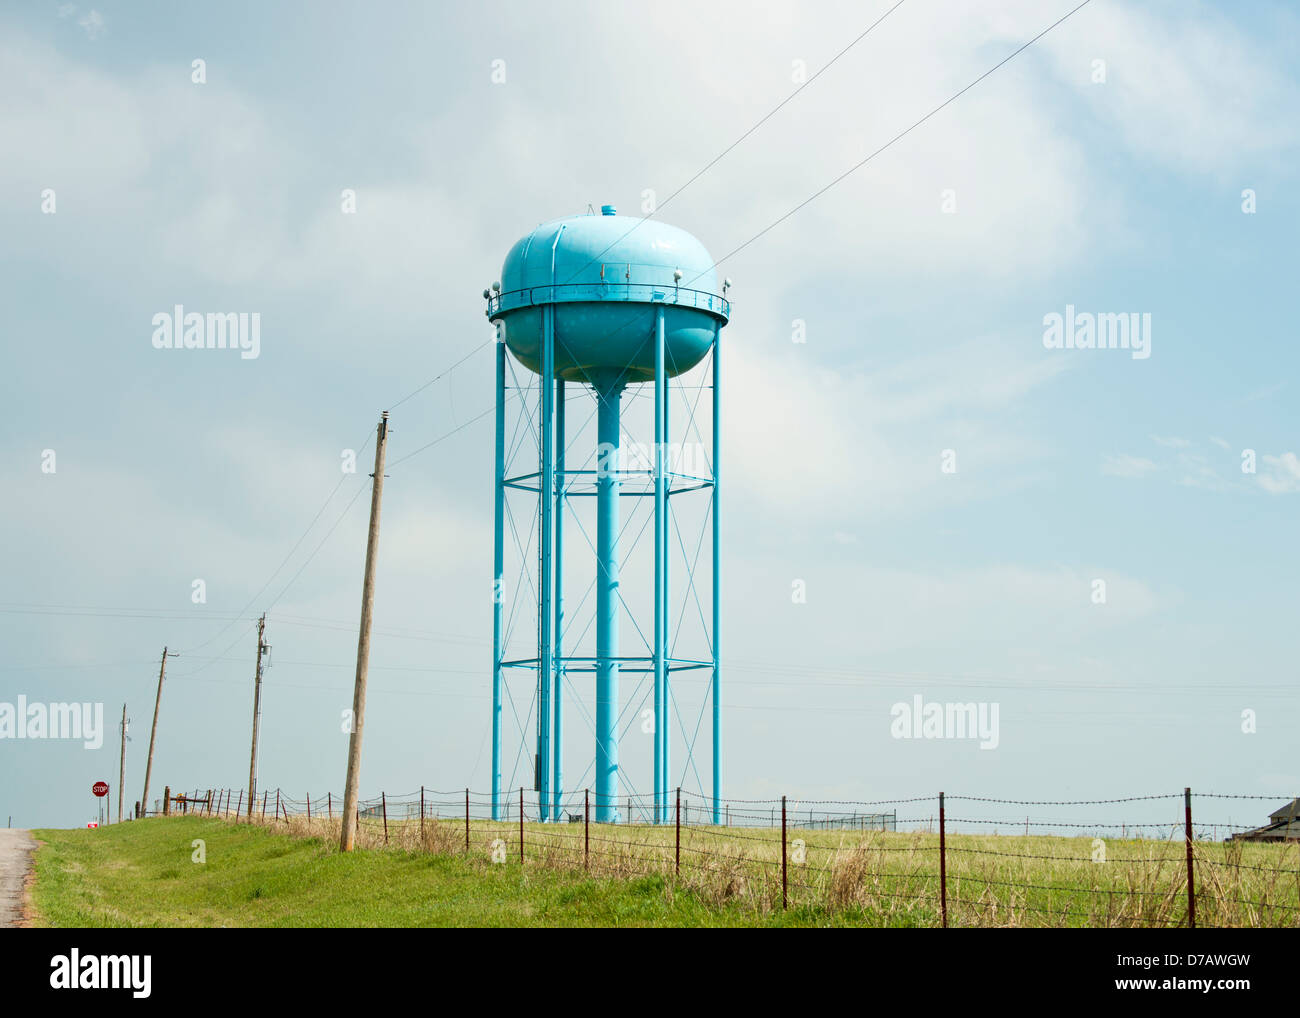 A water tower in rural Oklahoma. Stock Photo